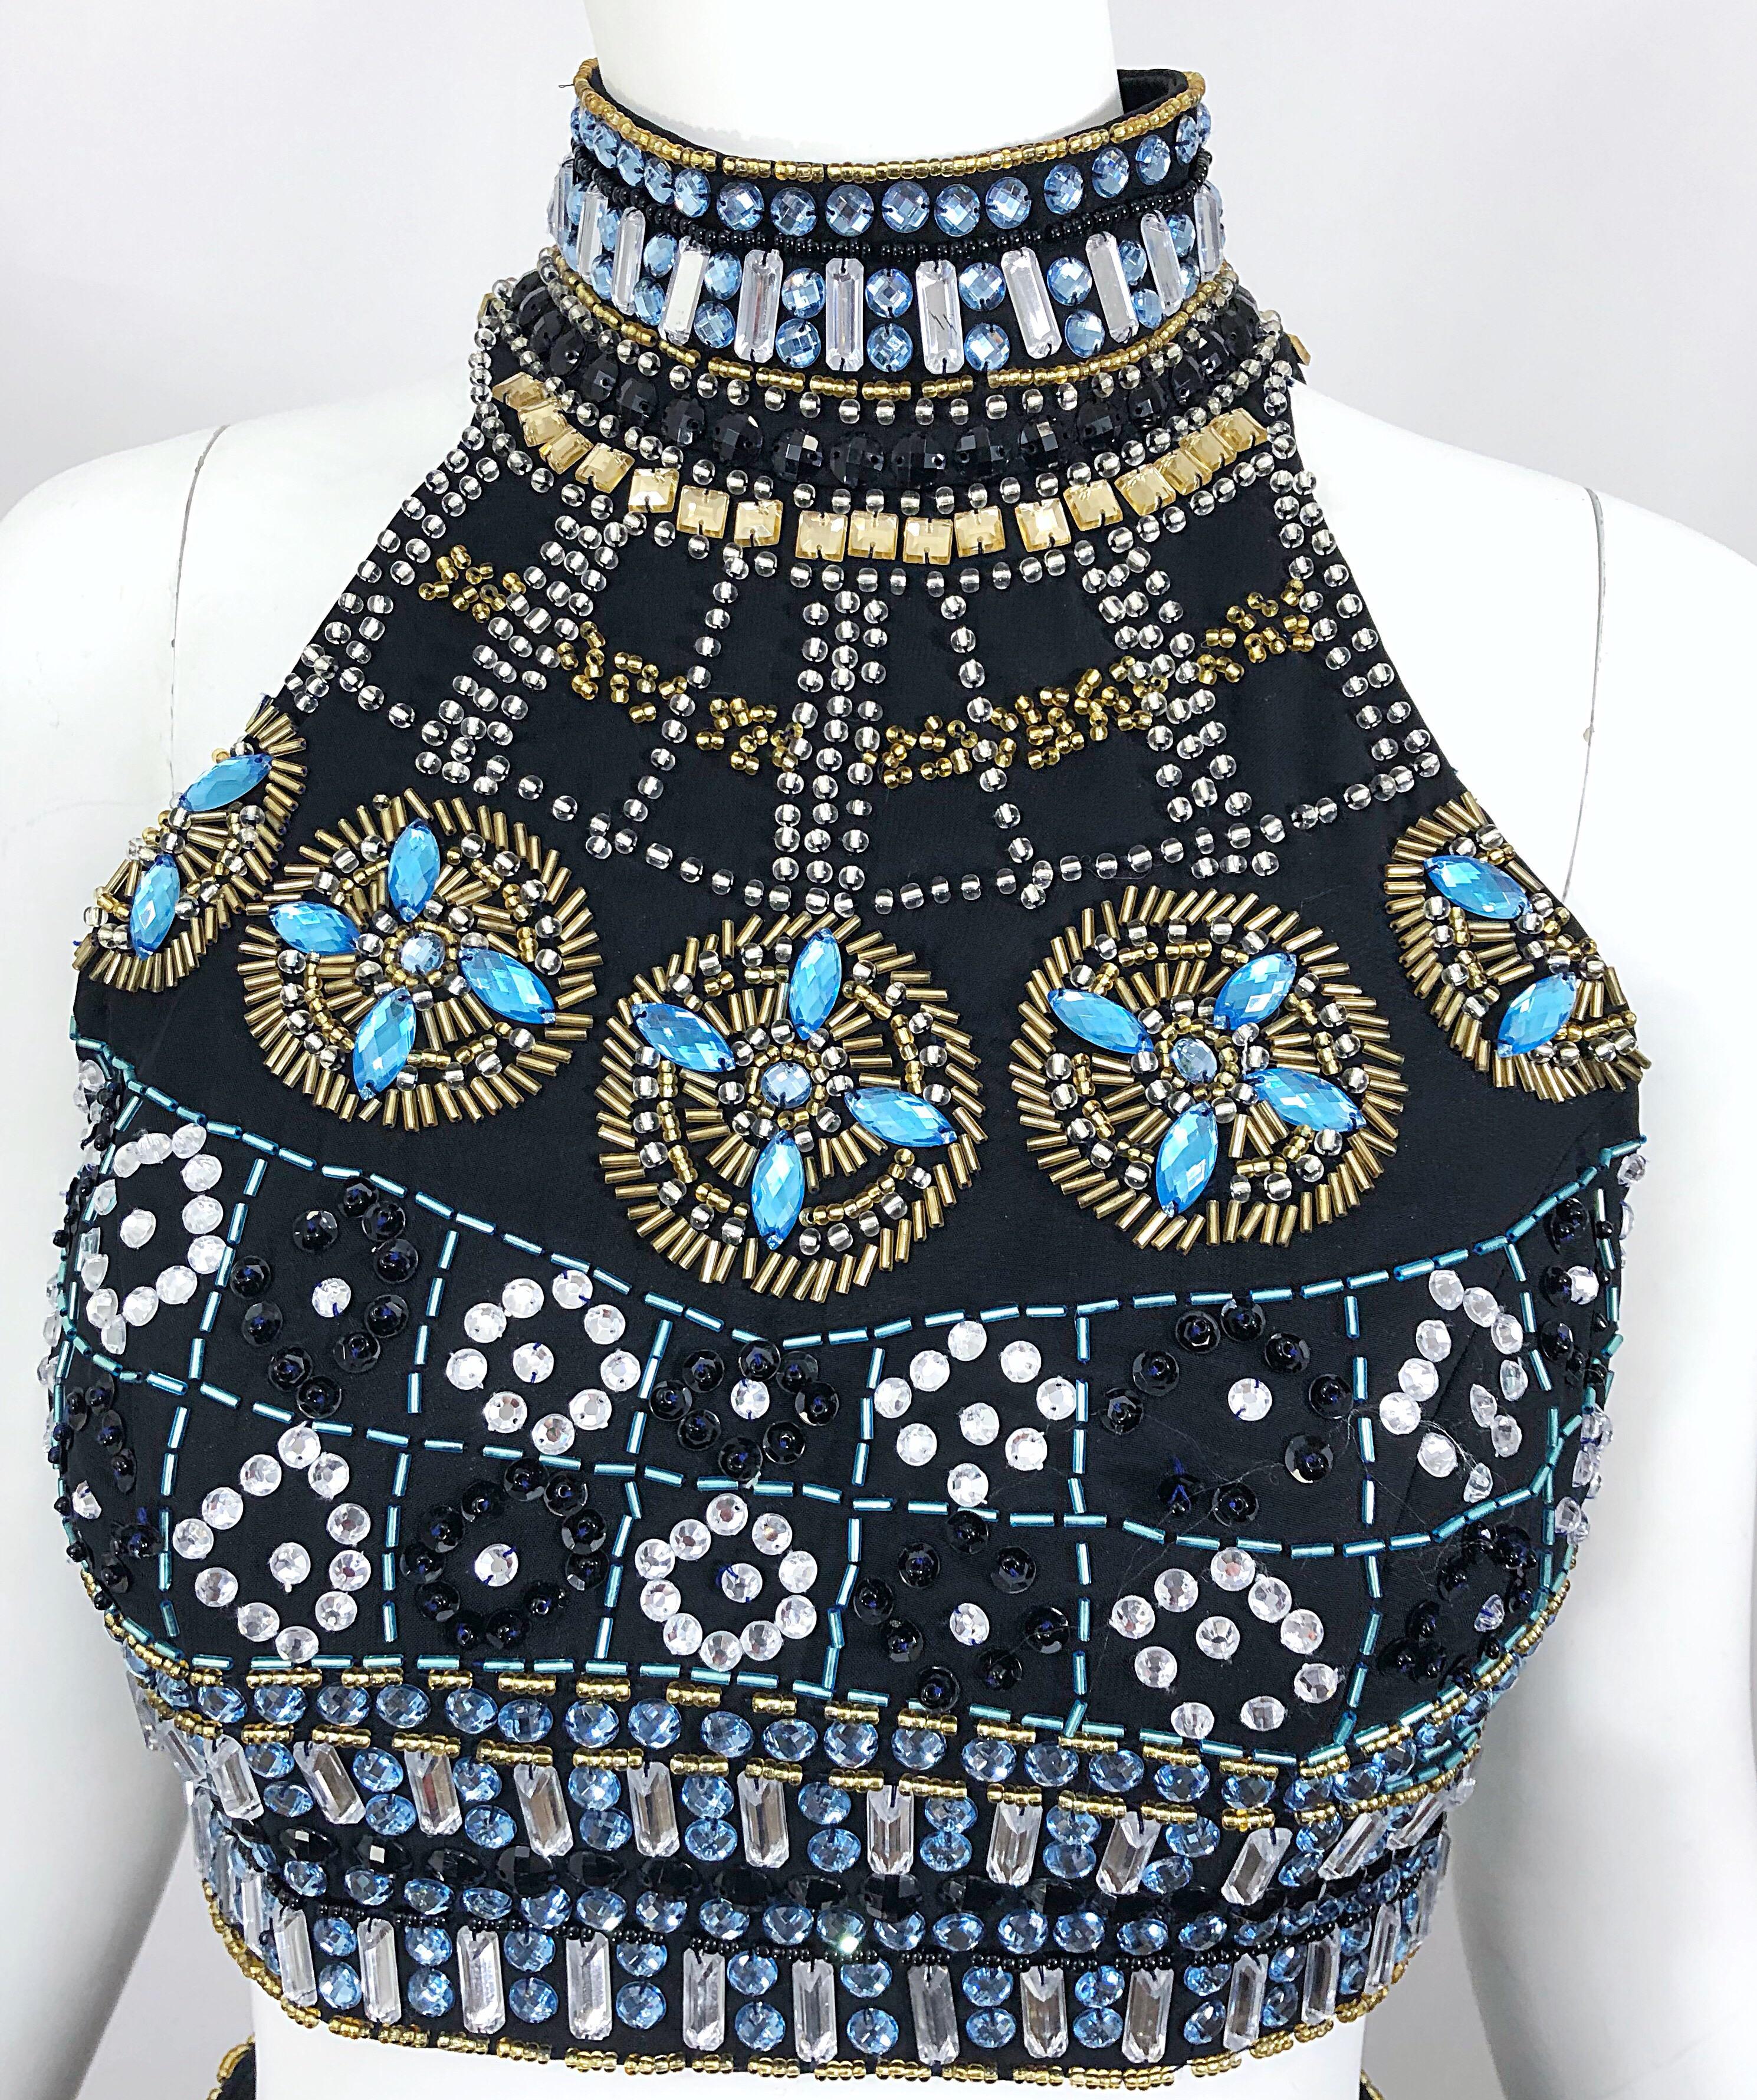 Sexy 1990s black chiffon beaded crop top and trained maxi skirt caged gown ensemble! Features turquoise blue, gold, silver and black beads throughout, along with rhinestones. Low rise skirt has a 
peek-a-boo in the back that reveals just the right